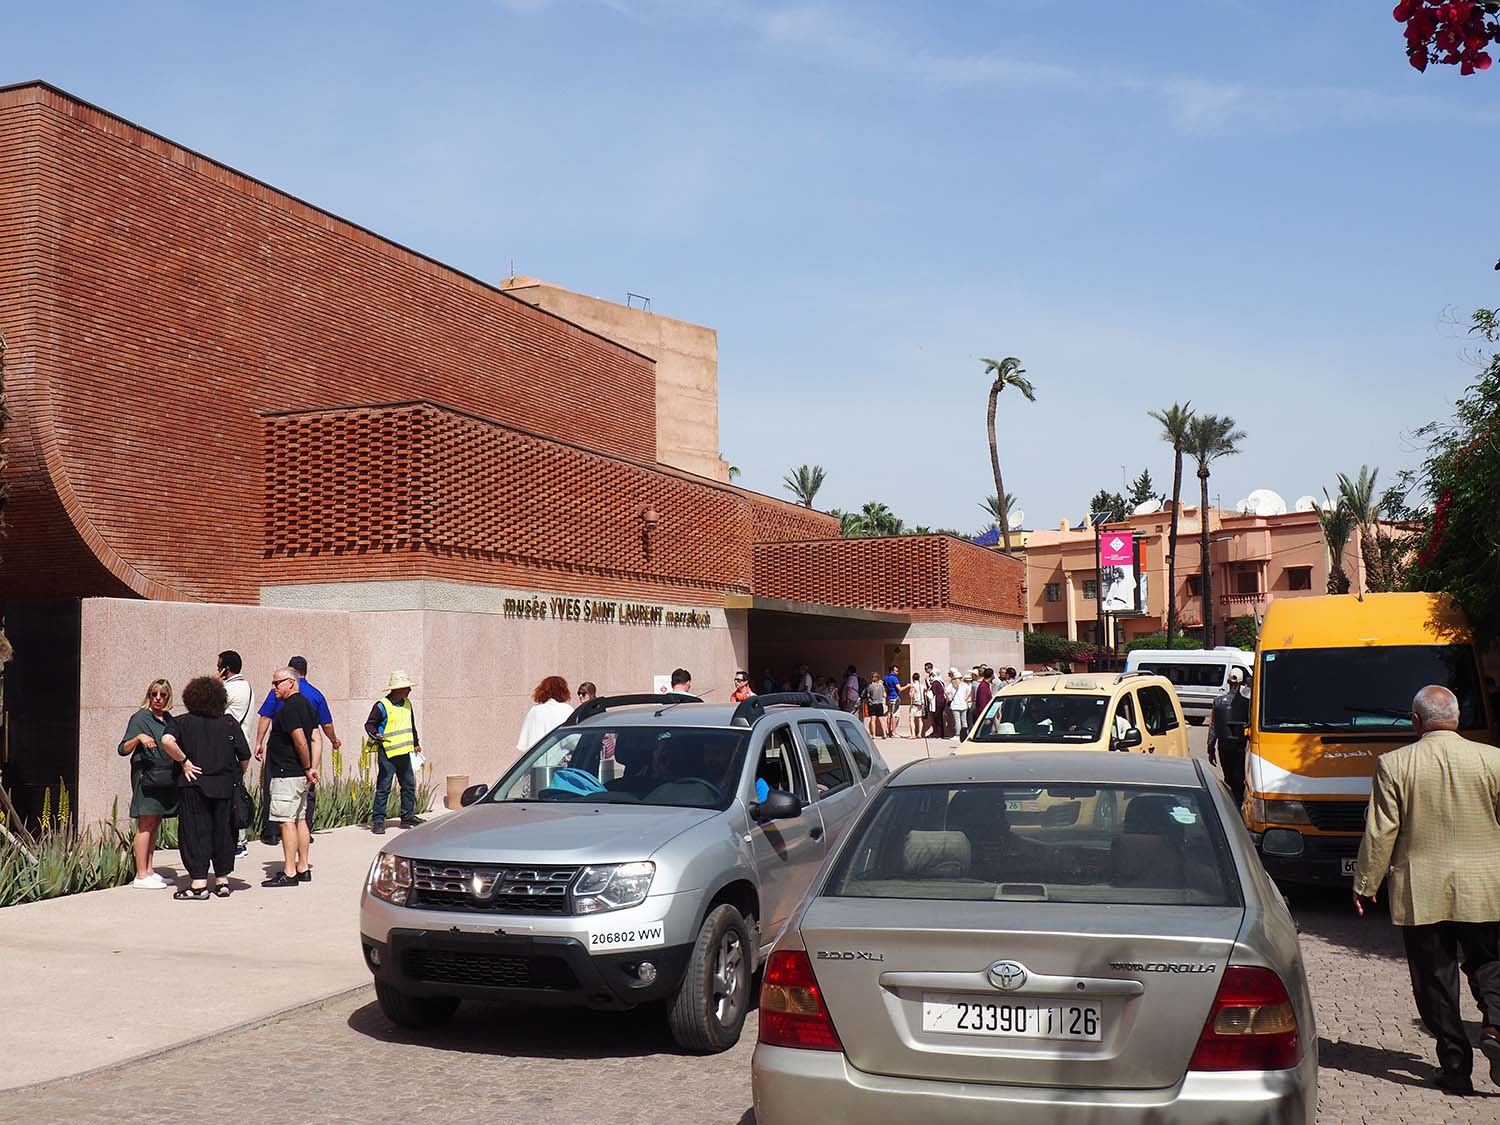 Pedestrians and vehicles on the sidewalk and street of the entrance facade<br>